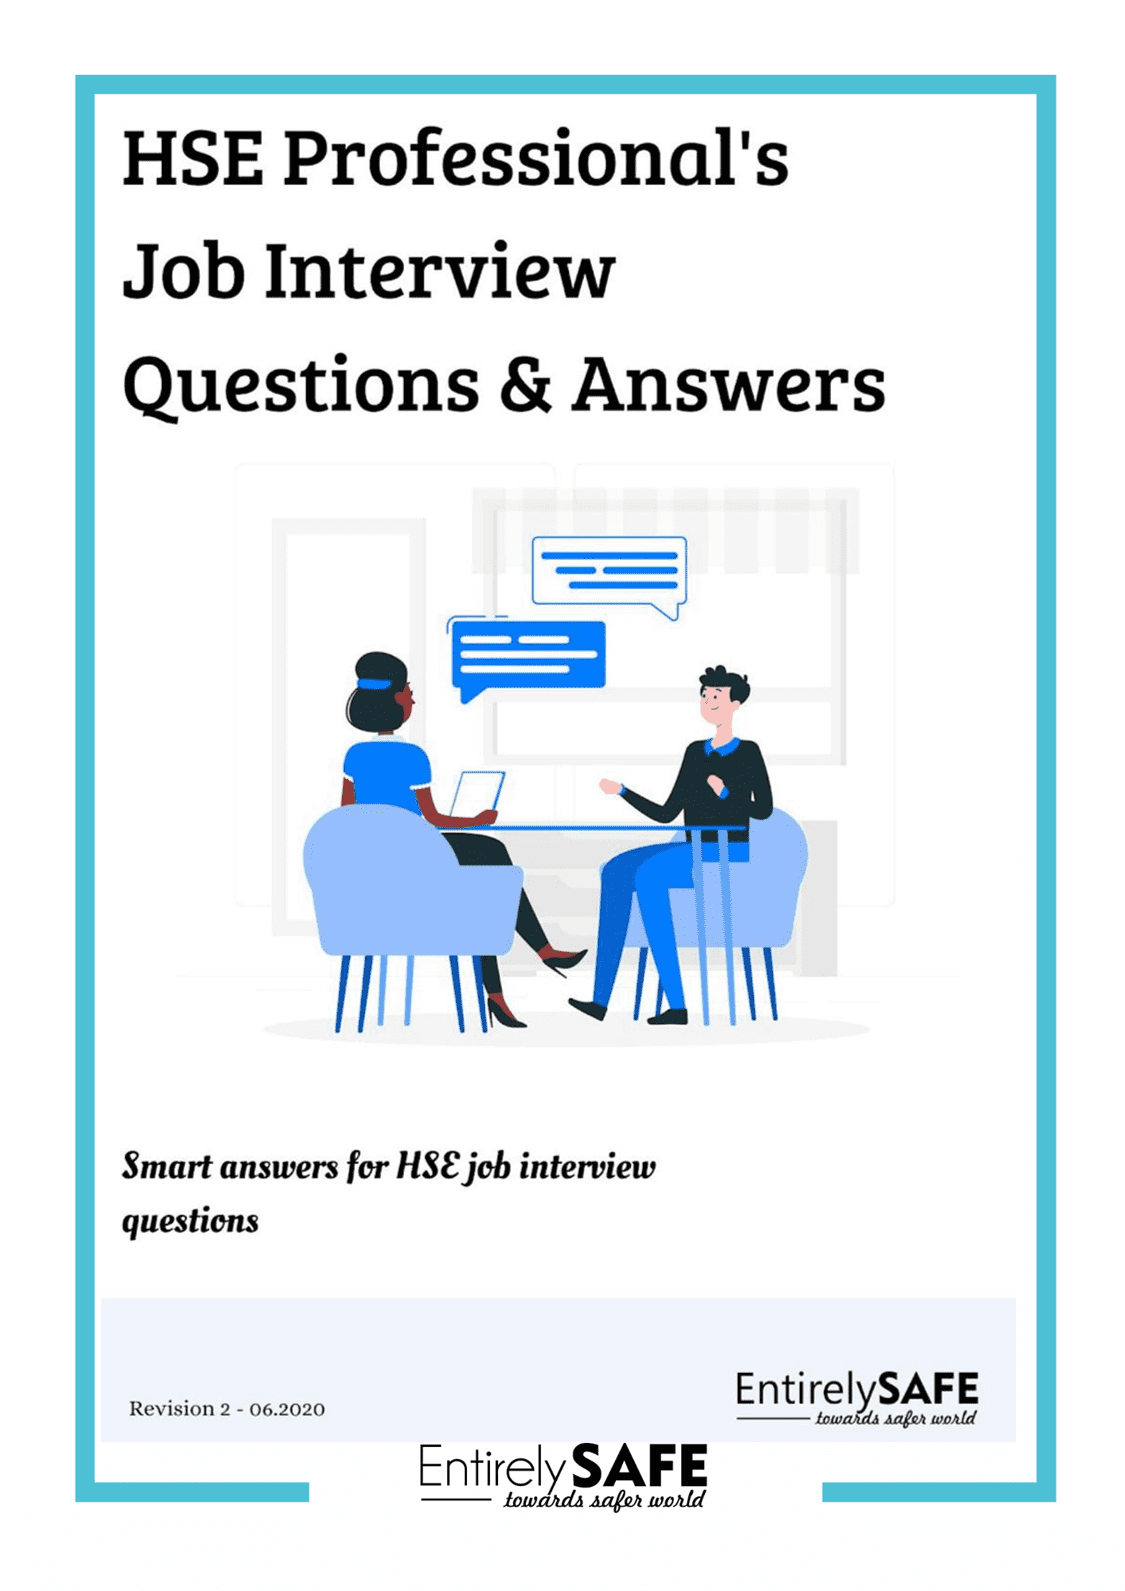 301-B-3-HSE-Professional-Safety-Job-Interview-Questions-Answers (1)